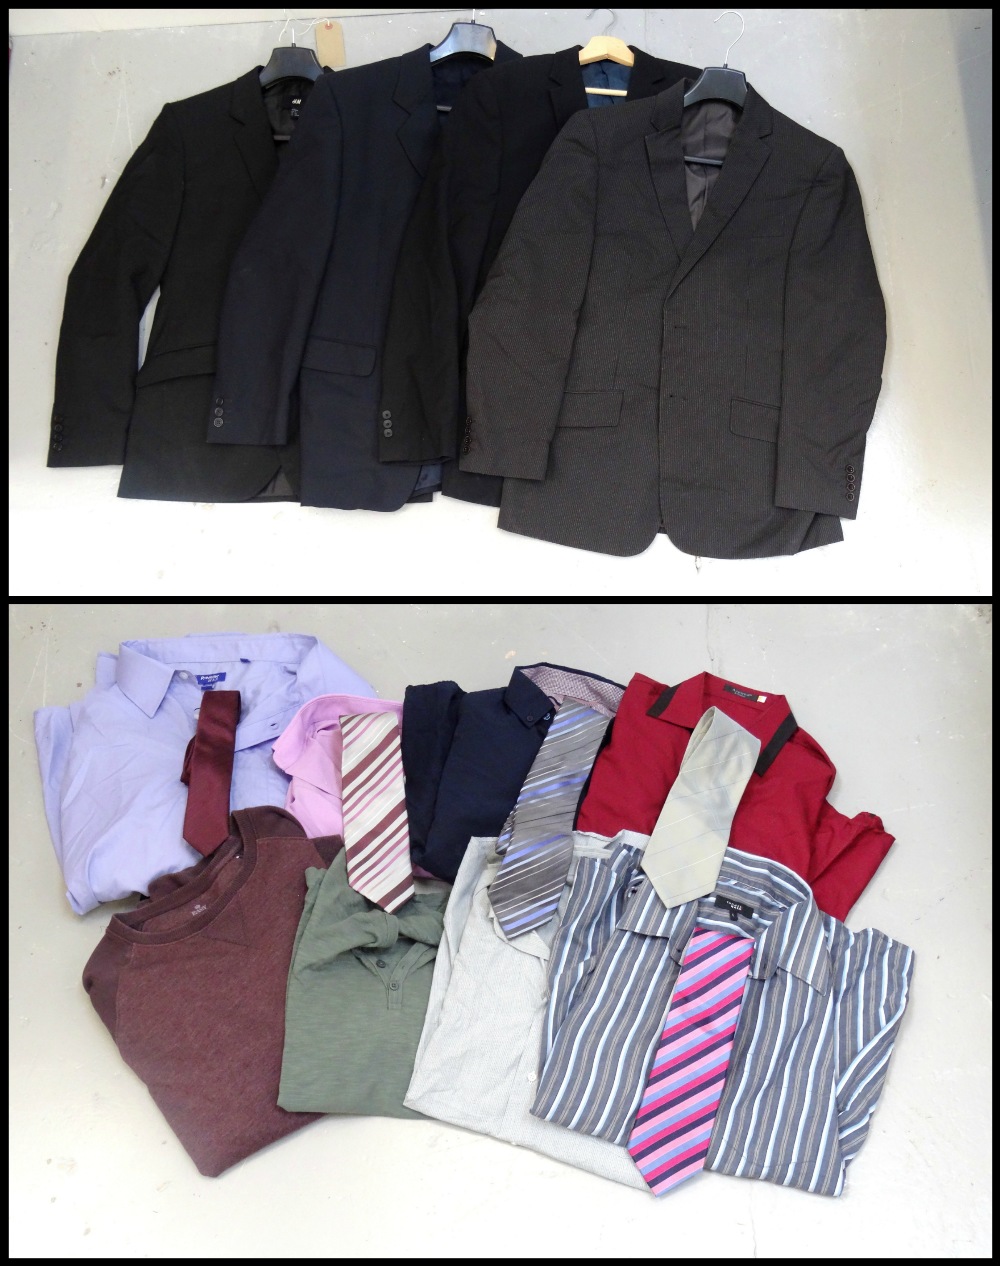 LOT OF VARIOUS GENTLEMEN'S CLOTHING including jackets, shirts, ties, etc.